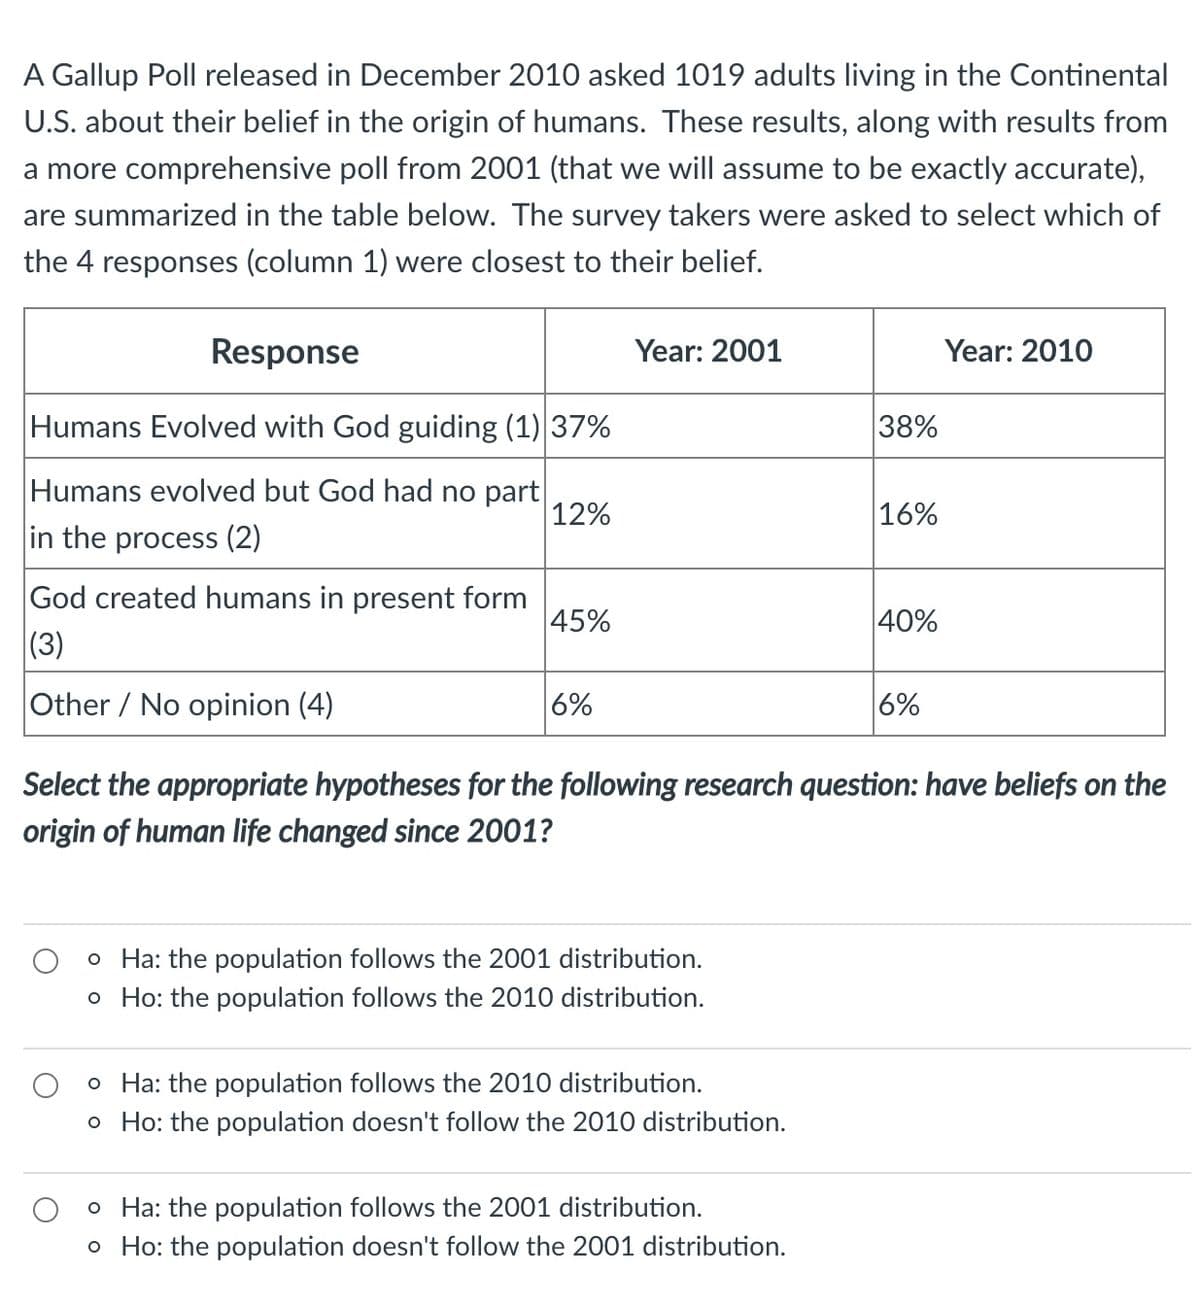 A Gallup Poll released in December 2010 asked 1019 adults living in the Continental
U.S. about their belief in the origin of humans. These results, along with results from
a more comprehensive poll from 2001 (that we will assume to be exactly accurate),
are summarized in the table below. The survey takers were asked to select which of
the 4 responses (column 1) were closest to their belief.
Response
Year: 2001
Year: 2010
Humans Evolved with God guiding (1) 37%
38%
Humans evolved but God had no part
12%
16%
in the process (2)
God created humans in present form
45%
40%
|(3)
Other / No opinion (4)
6%
6%
Select the appropriate hypotheses for the following research question: have beliefs on the
origin of human life changed since 2001?
o Ha: the population follows the 2001 distribution.
o Ho: the population follows the 2010 distribution.
o Ha: the population follows the 2010 distribution.
o Ho: the population doesn't follow the 2010 distribution.
o Ha: the population follows the 2001 distribution.
o Ho: the population doesn't follow the 2001 distribution.
